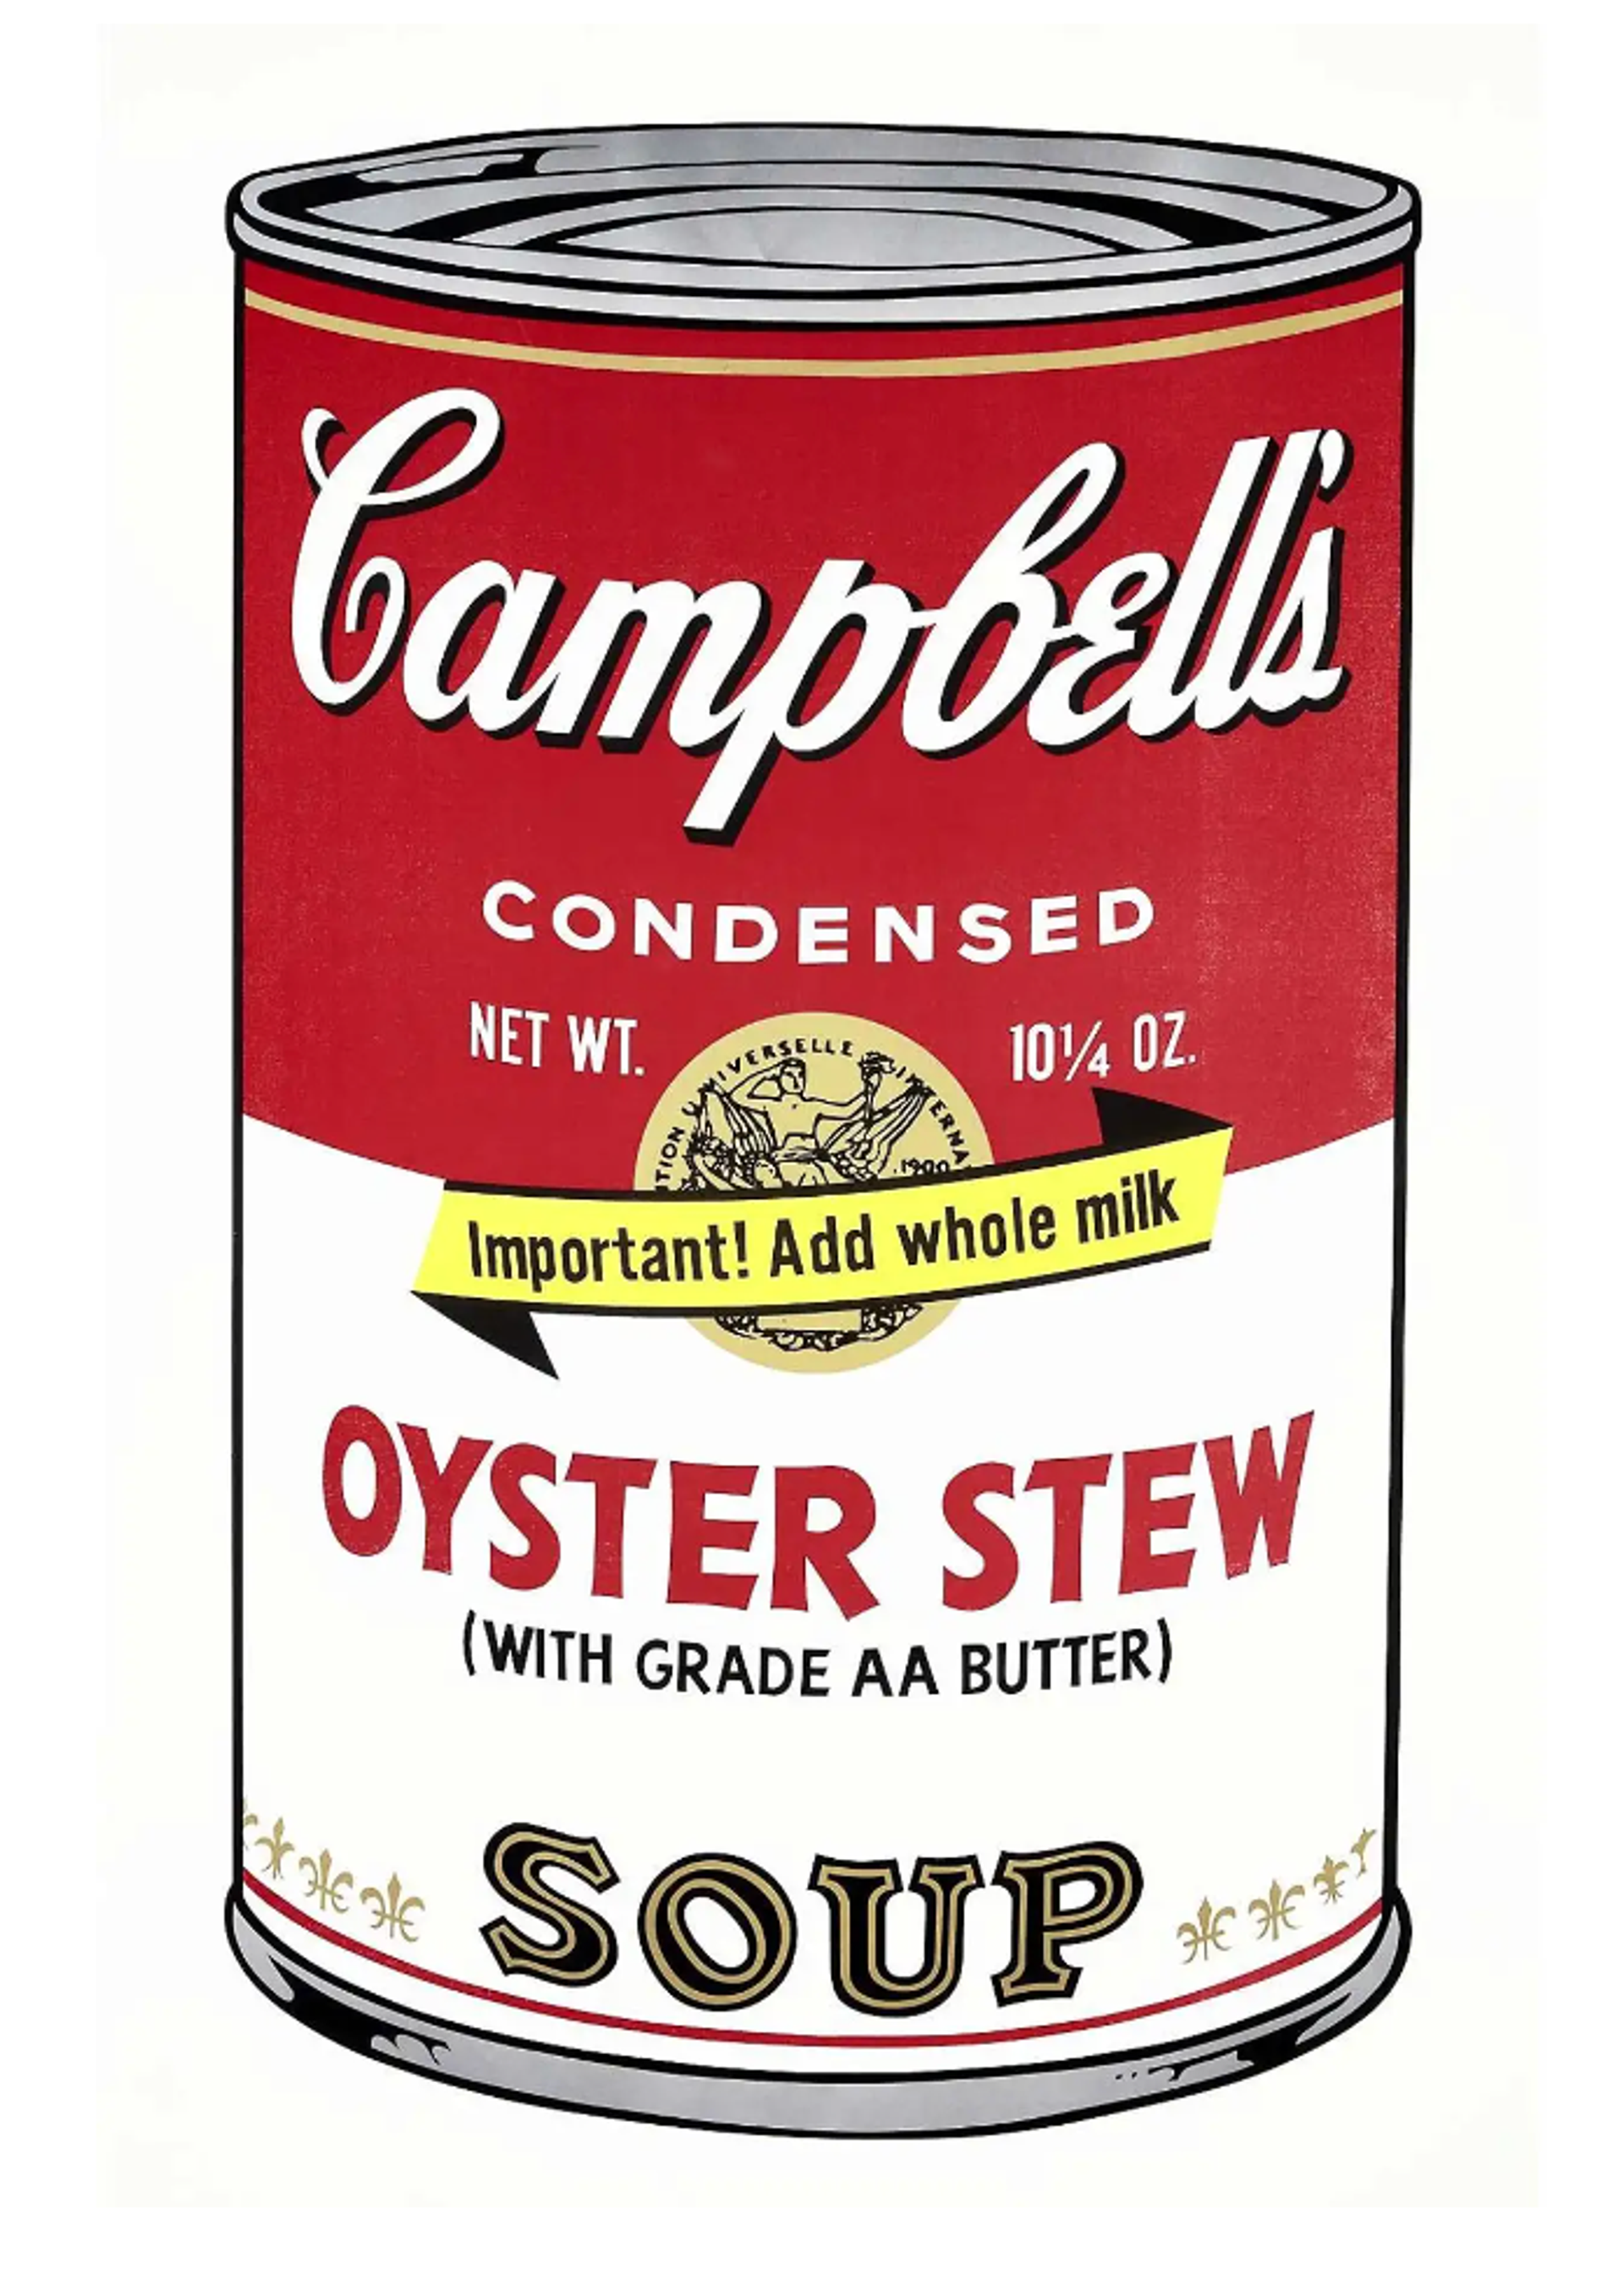 Campbell's Soup Oyster Stew by Andy Warhol - MyArtBroker 